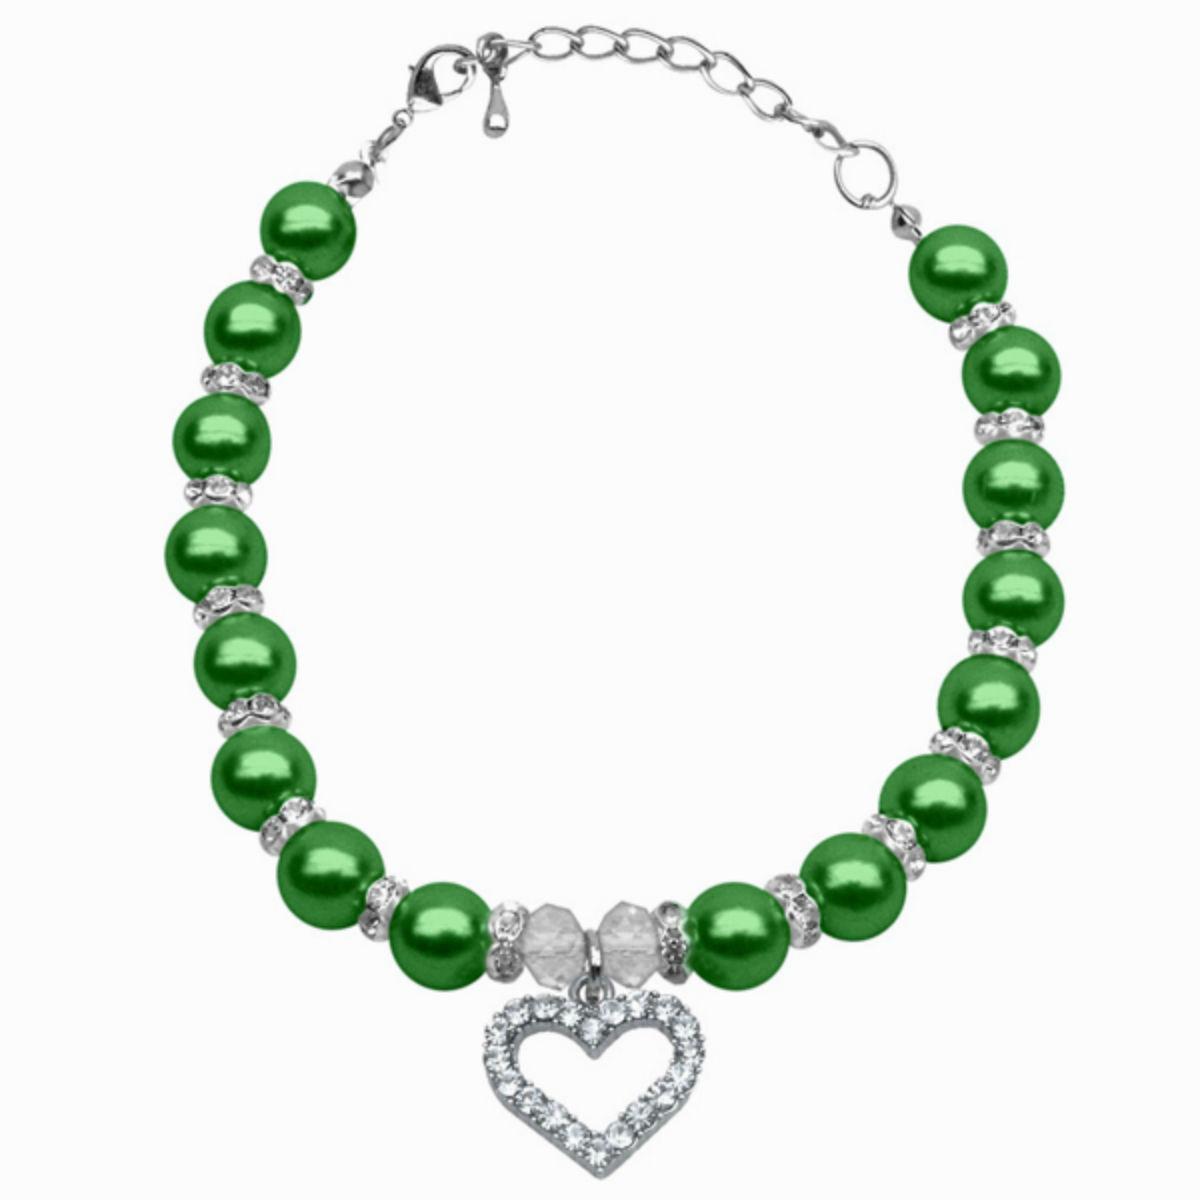 Heart and Pearl Dog Necklace - Lime Green